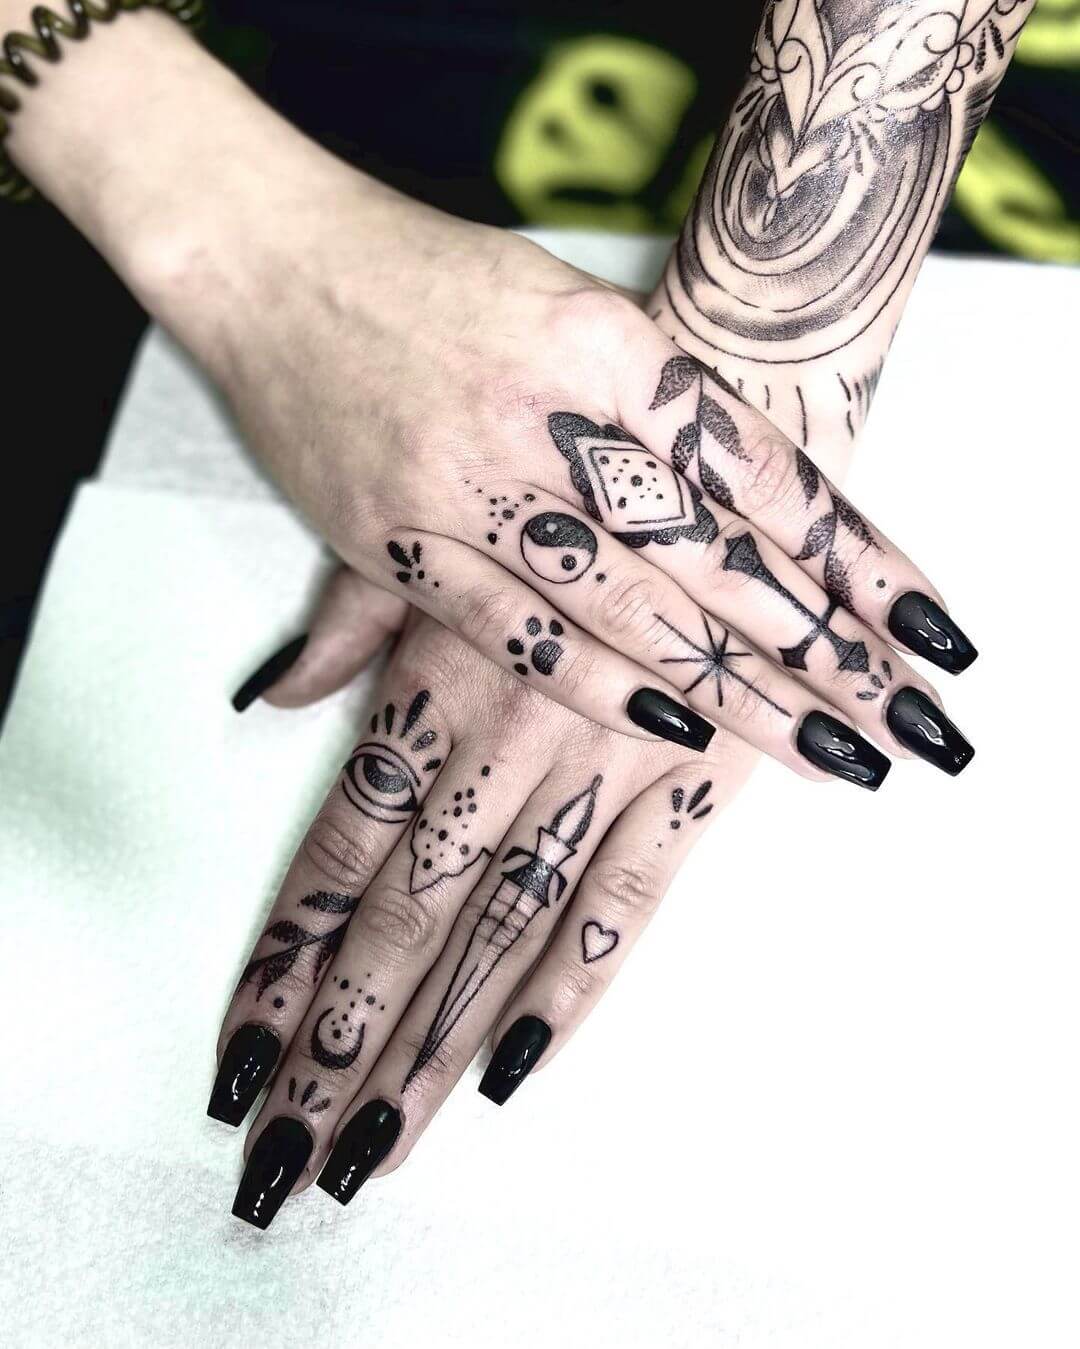 How painful are finger tattoos? - Quora